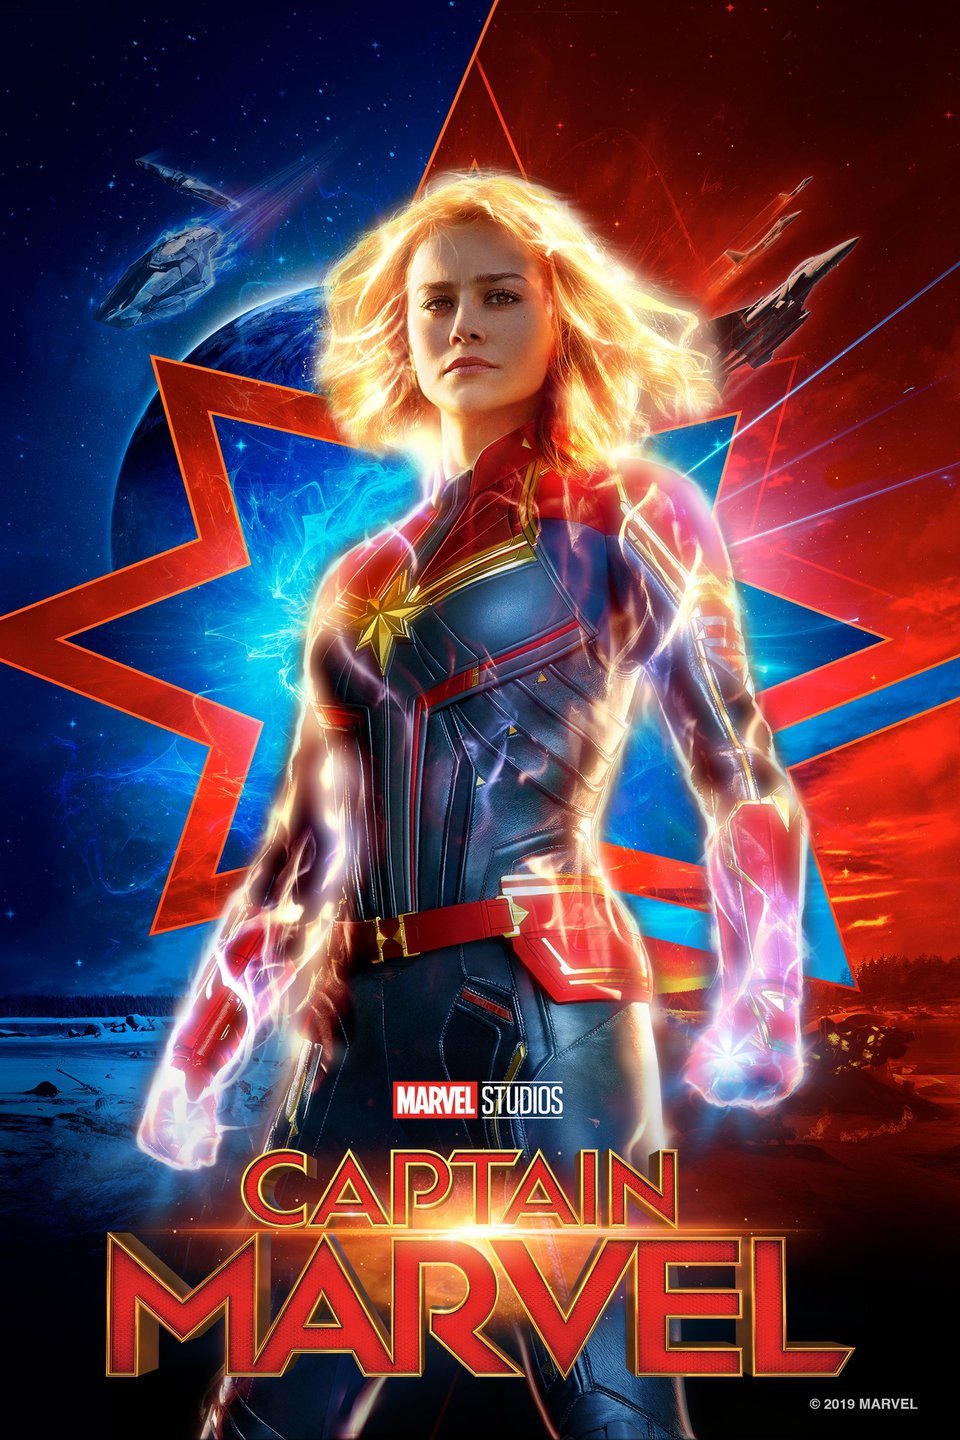 "Marvel Studios   Captain Marvel   ©2019 MARVEL" Blond woman wearing blue and red armor with gold star on chest, glowing arms and hair, blue and red background